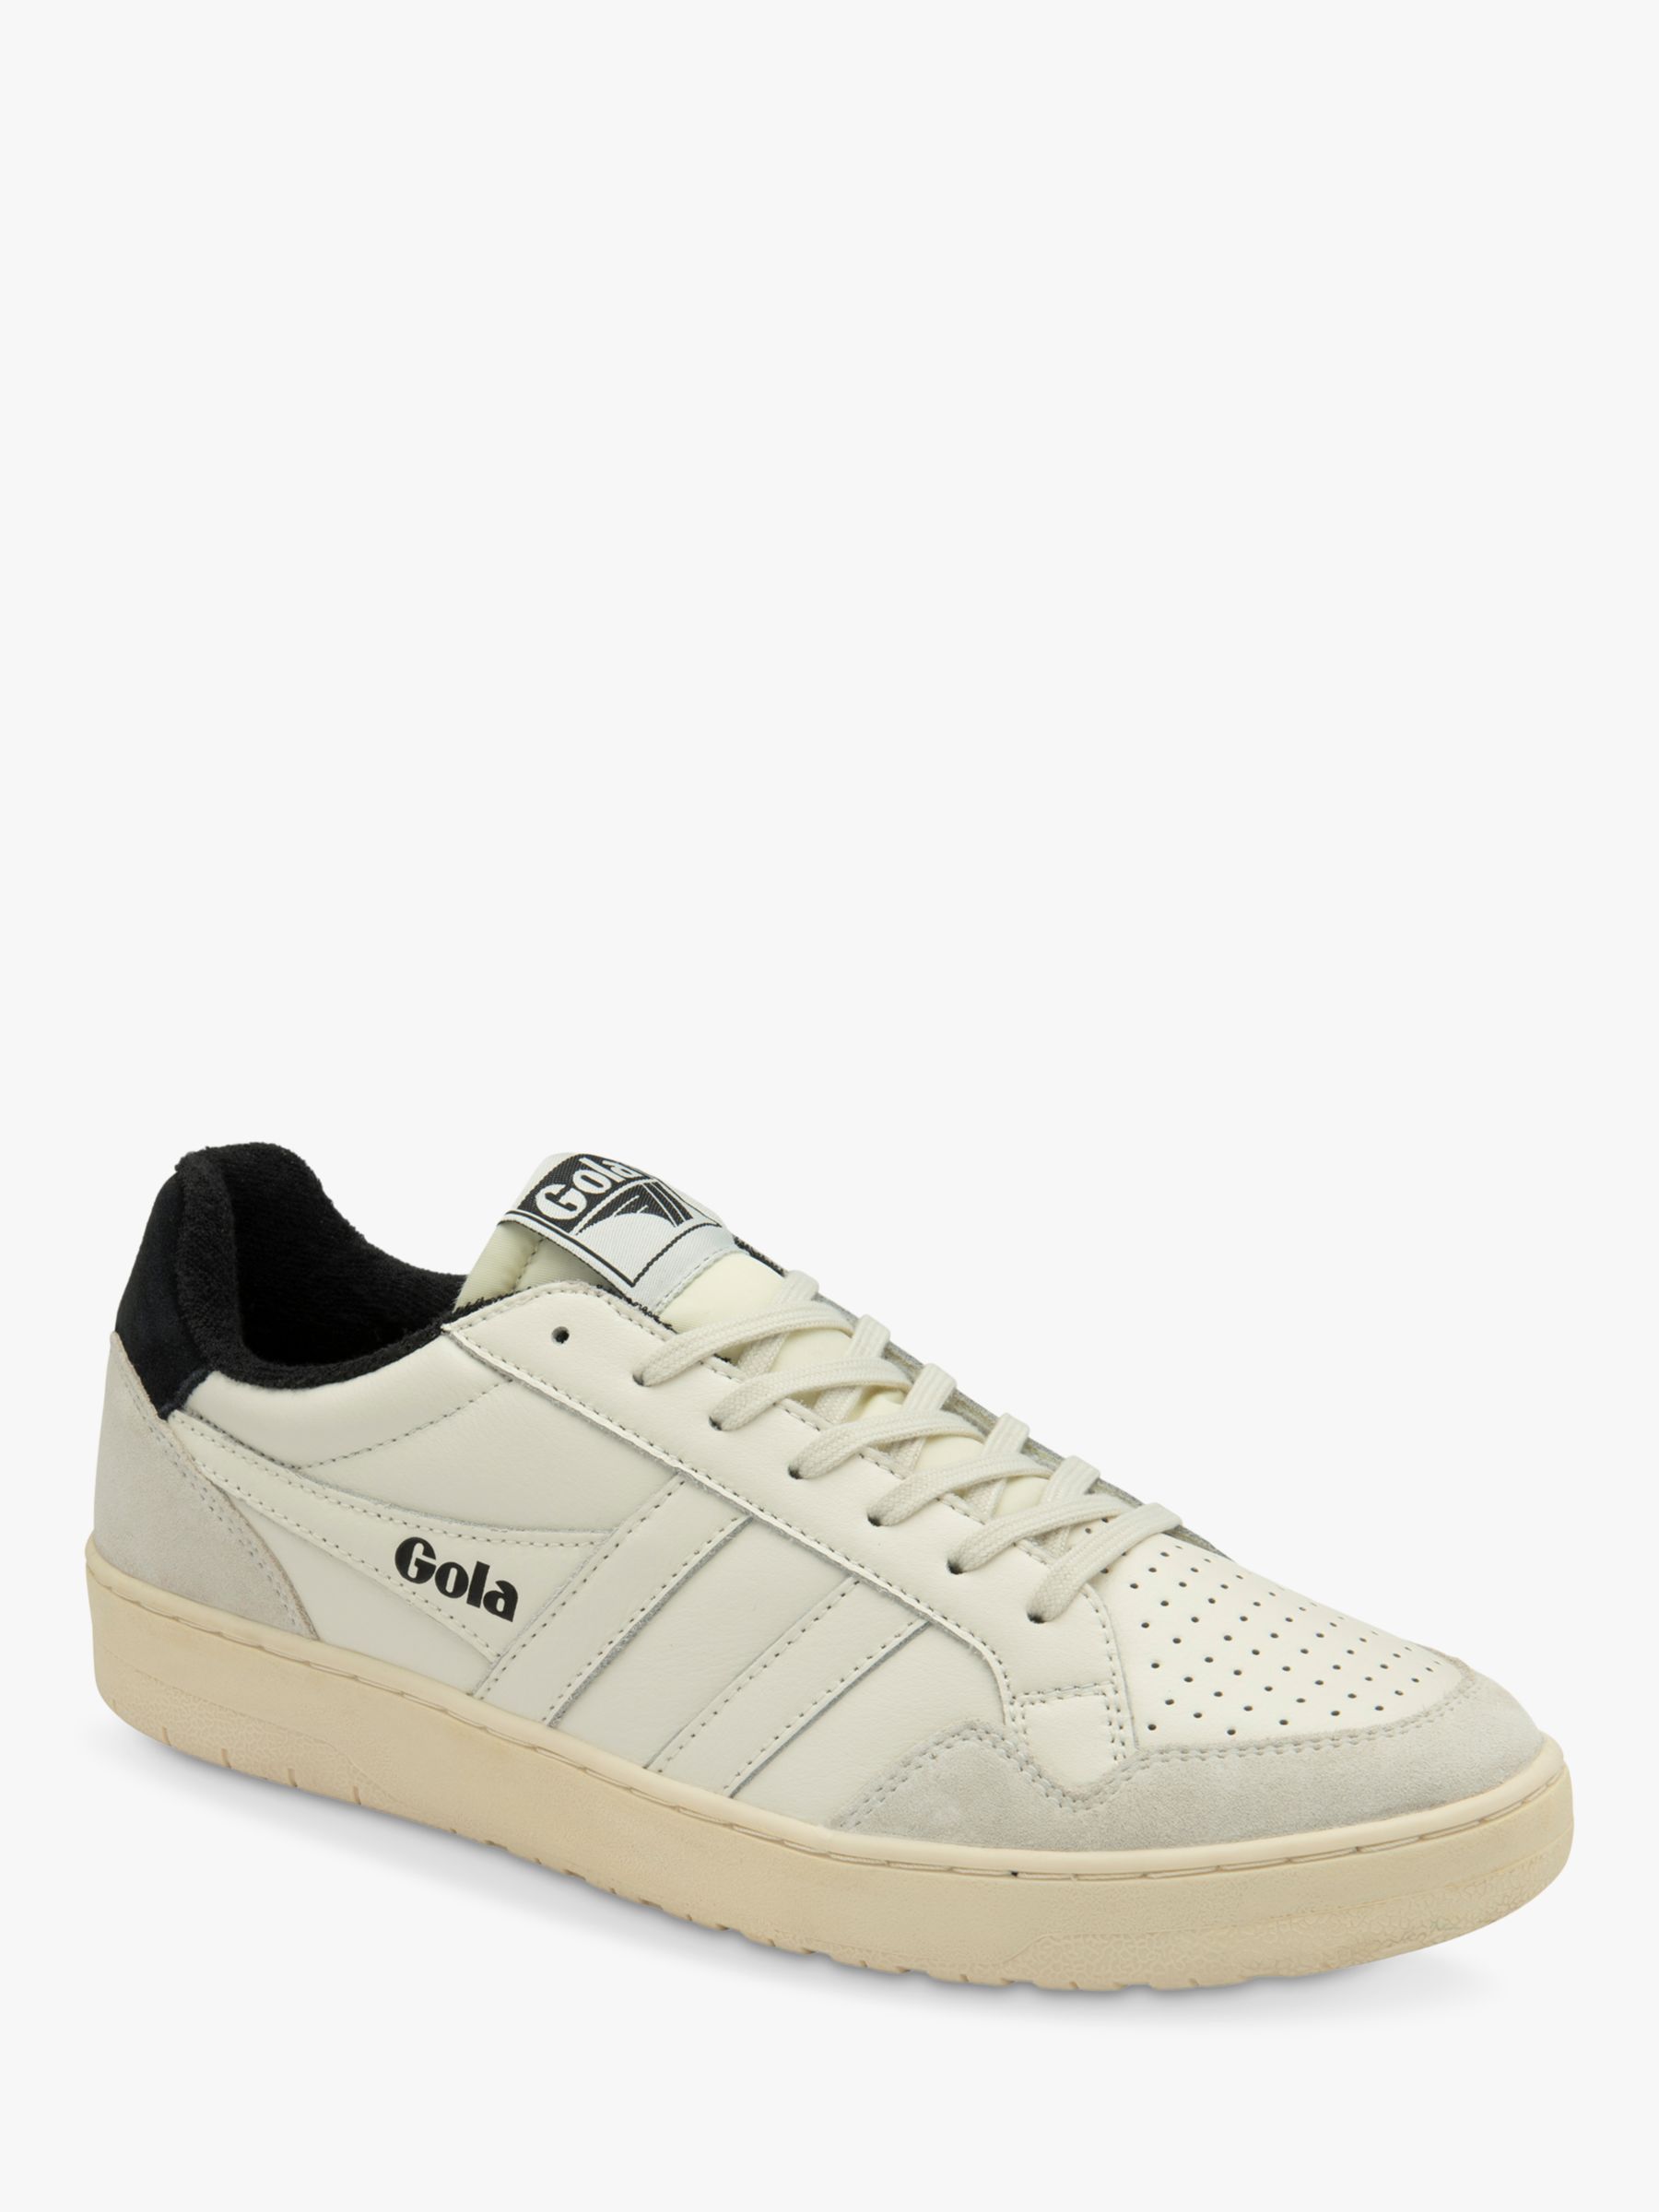 Buy Gola Classics Eagle Leather Lace Up Trainers, Off White/Black Online at johnlewis.com